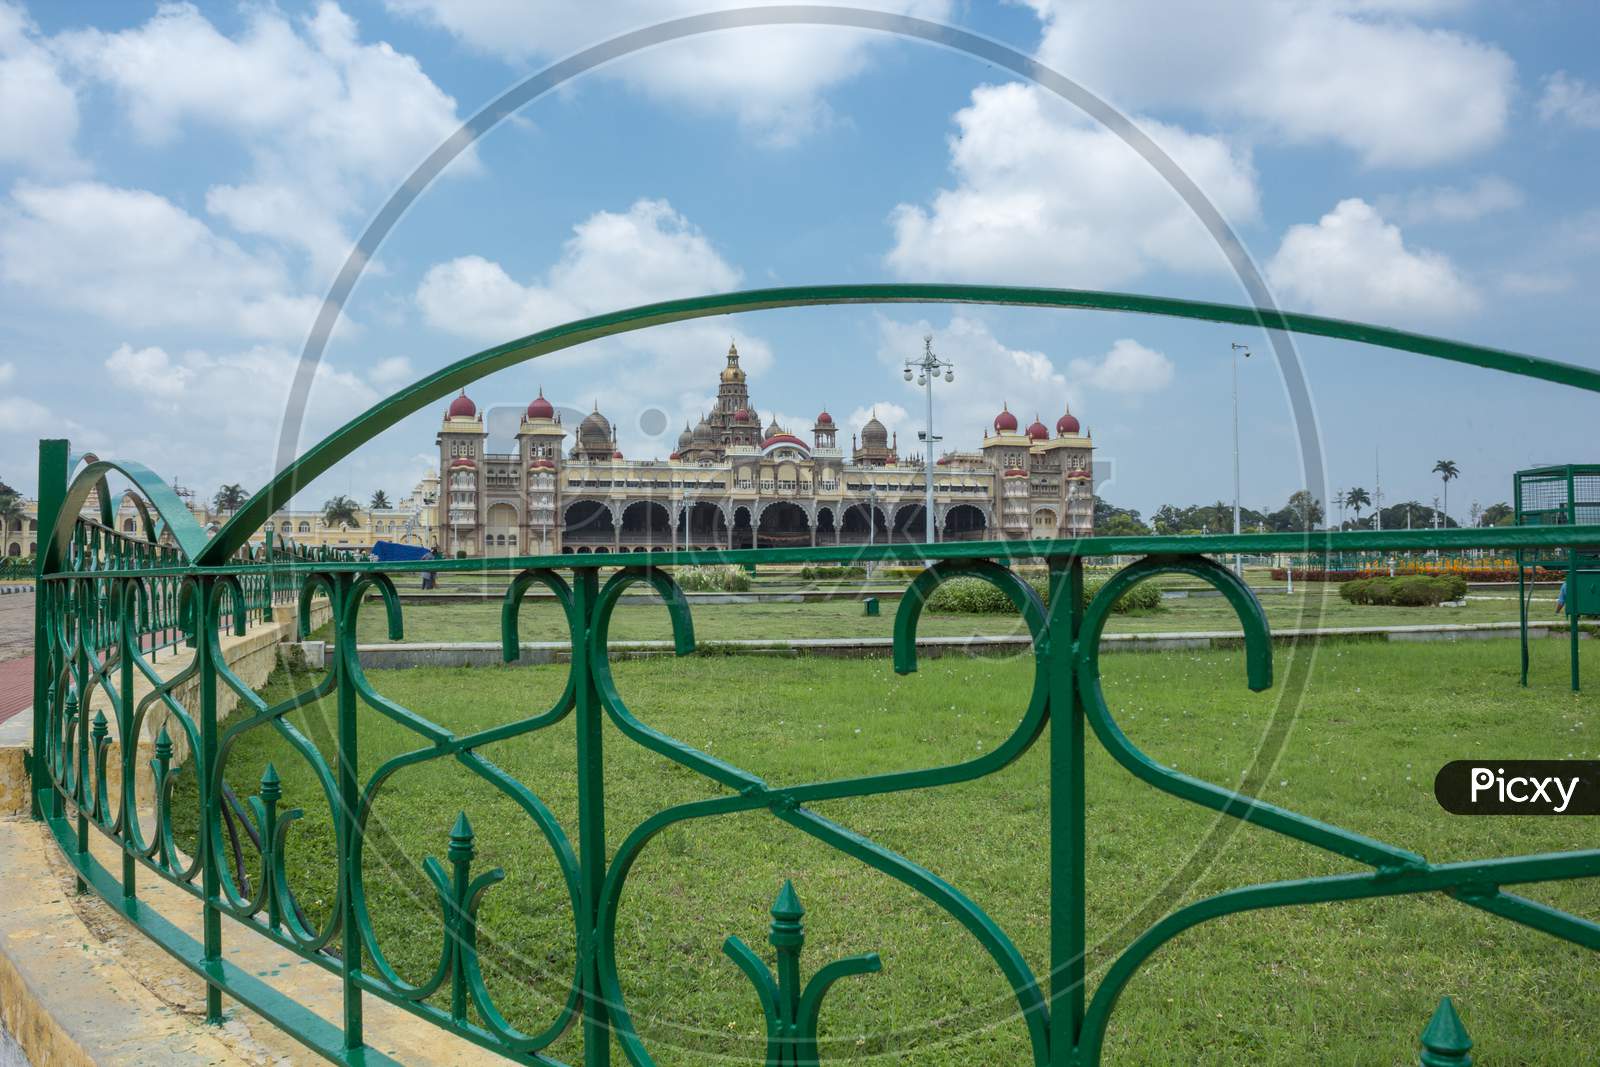 A Beautiful view of the Ambavilas Palace with the Clouds seen through the garden railing in Mysuru cityscape of Karnataka/India.